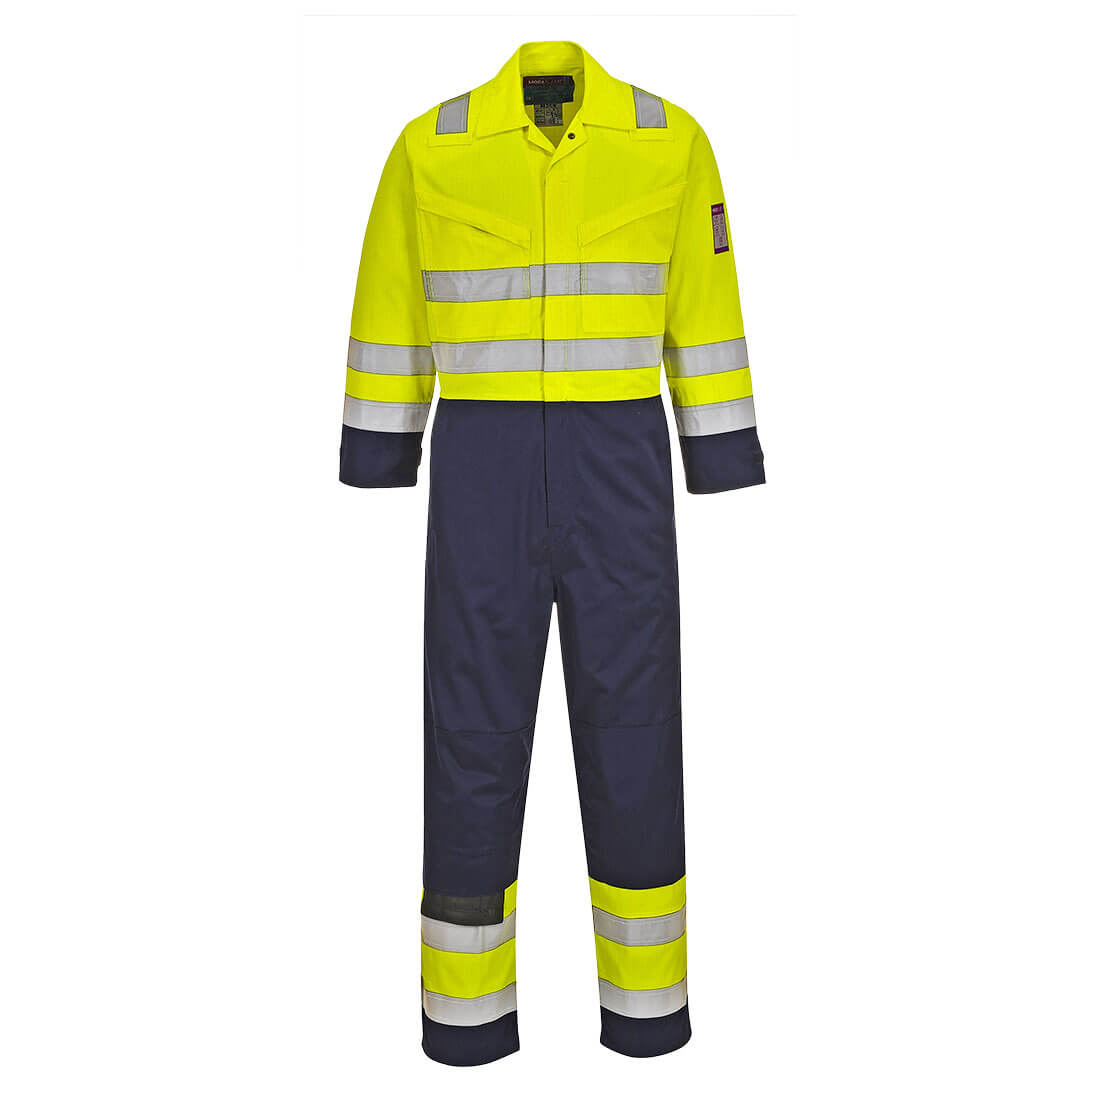 Image of Modaflame Flame Resistant Hi Vis Overall Yellow / Navy 2XL 34"